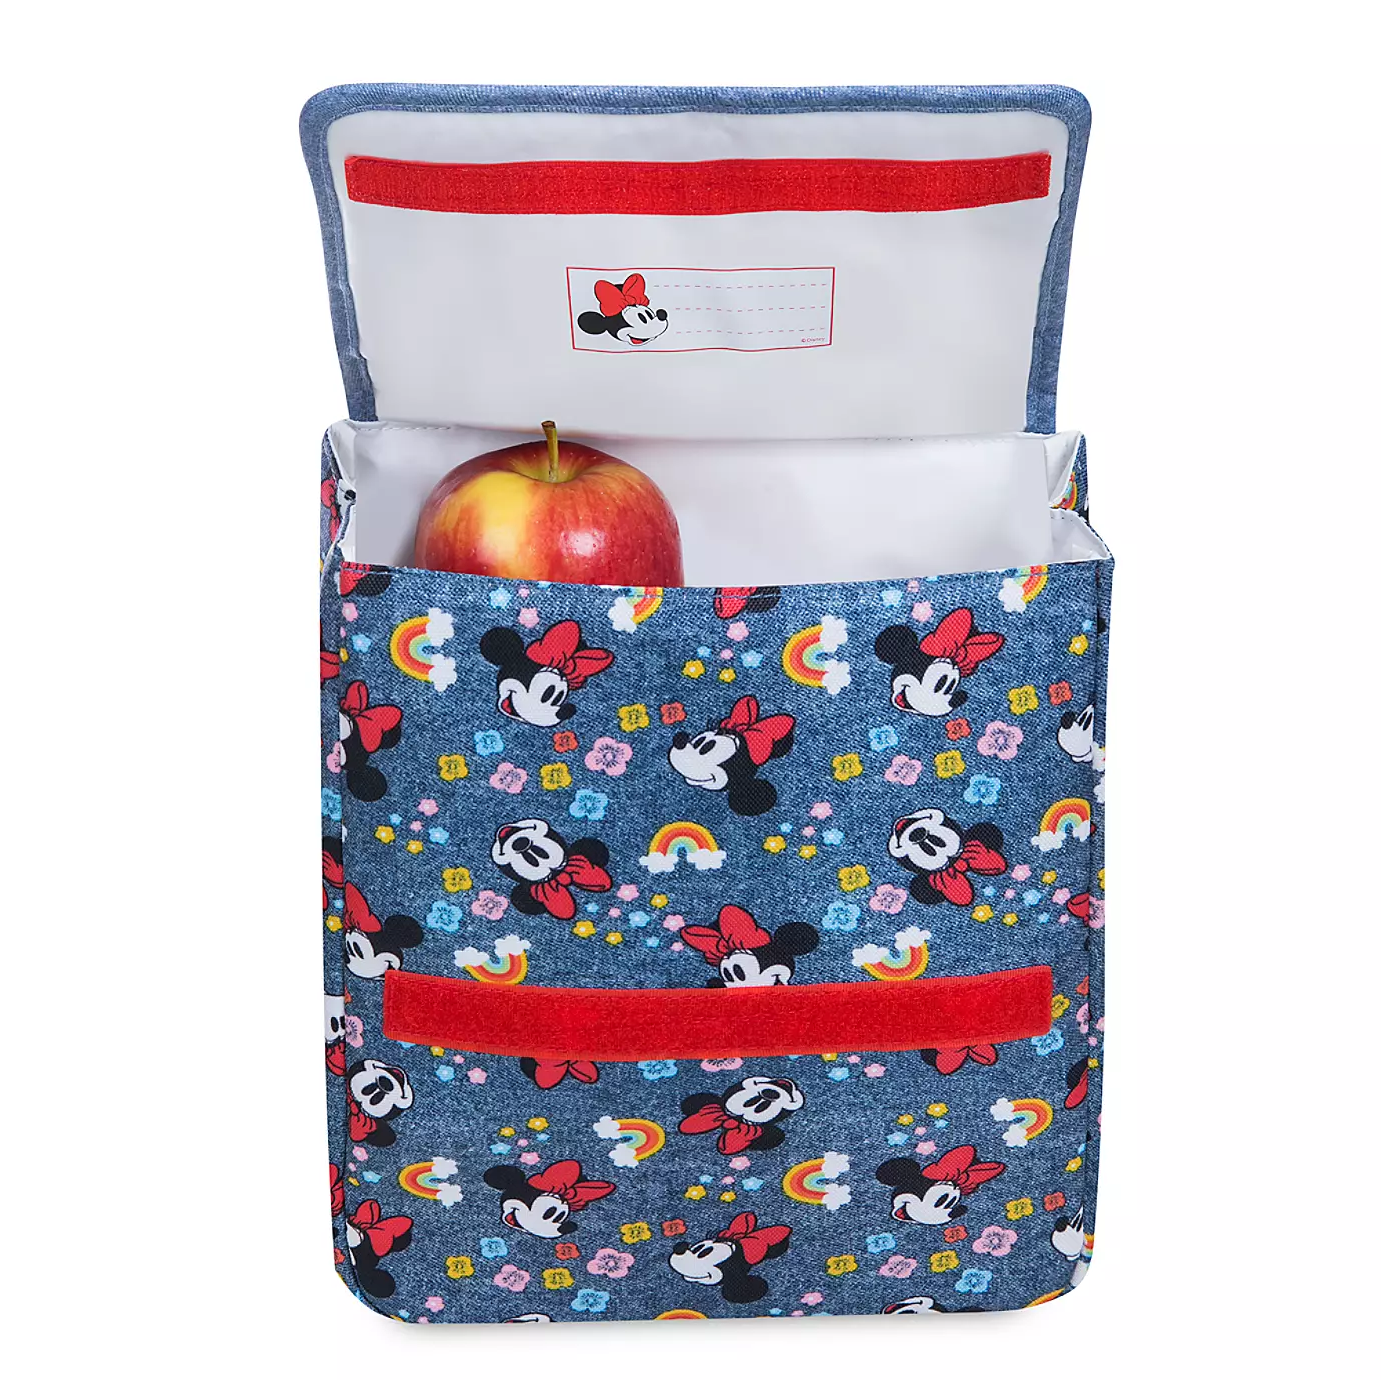 Mickey Mouse Lunch Cooler Bag | The Compleat Kitchen Hawaii